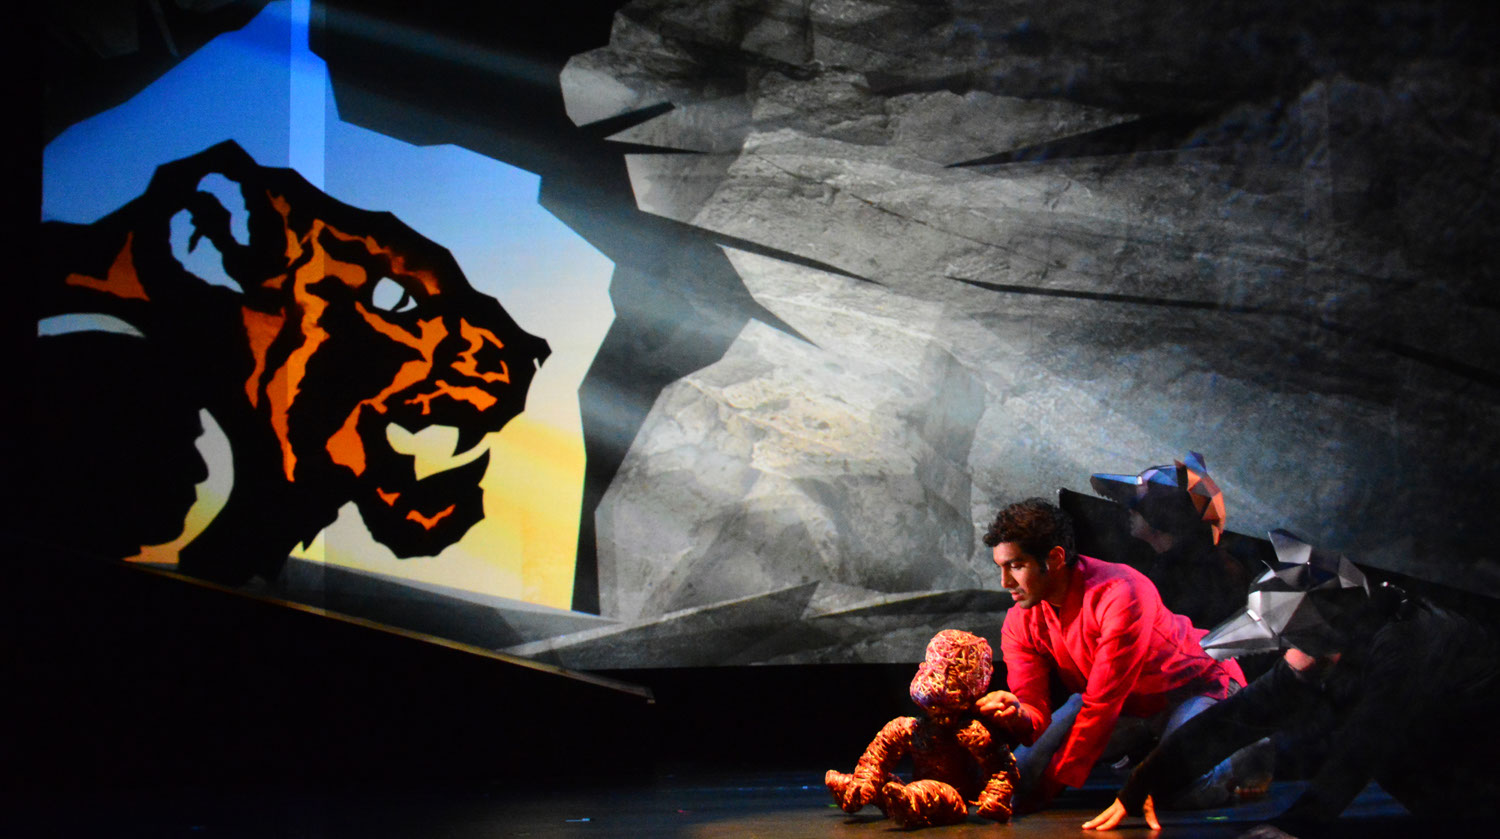 Image of stage which features a colourful, illuminated graphic of a tiger shining brightly over the backdrop of a stone wall. In the right corner of the stage, a man wearing a red shirt kneels on the floor beside other actors who are dressed in geometric wolf heads and black bodysuits. They all hover together, facing the direction of the tiger before them. 